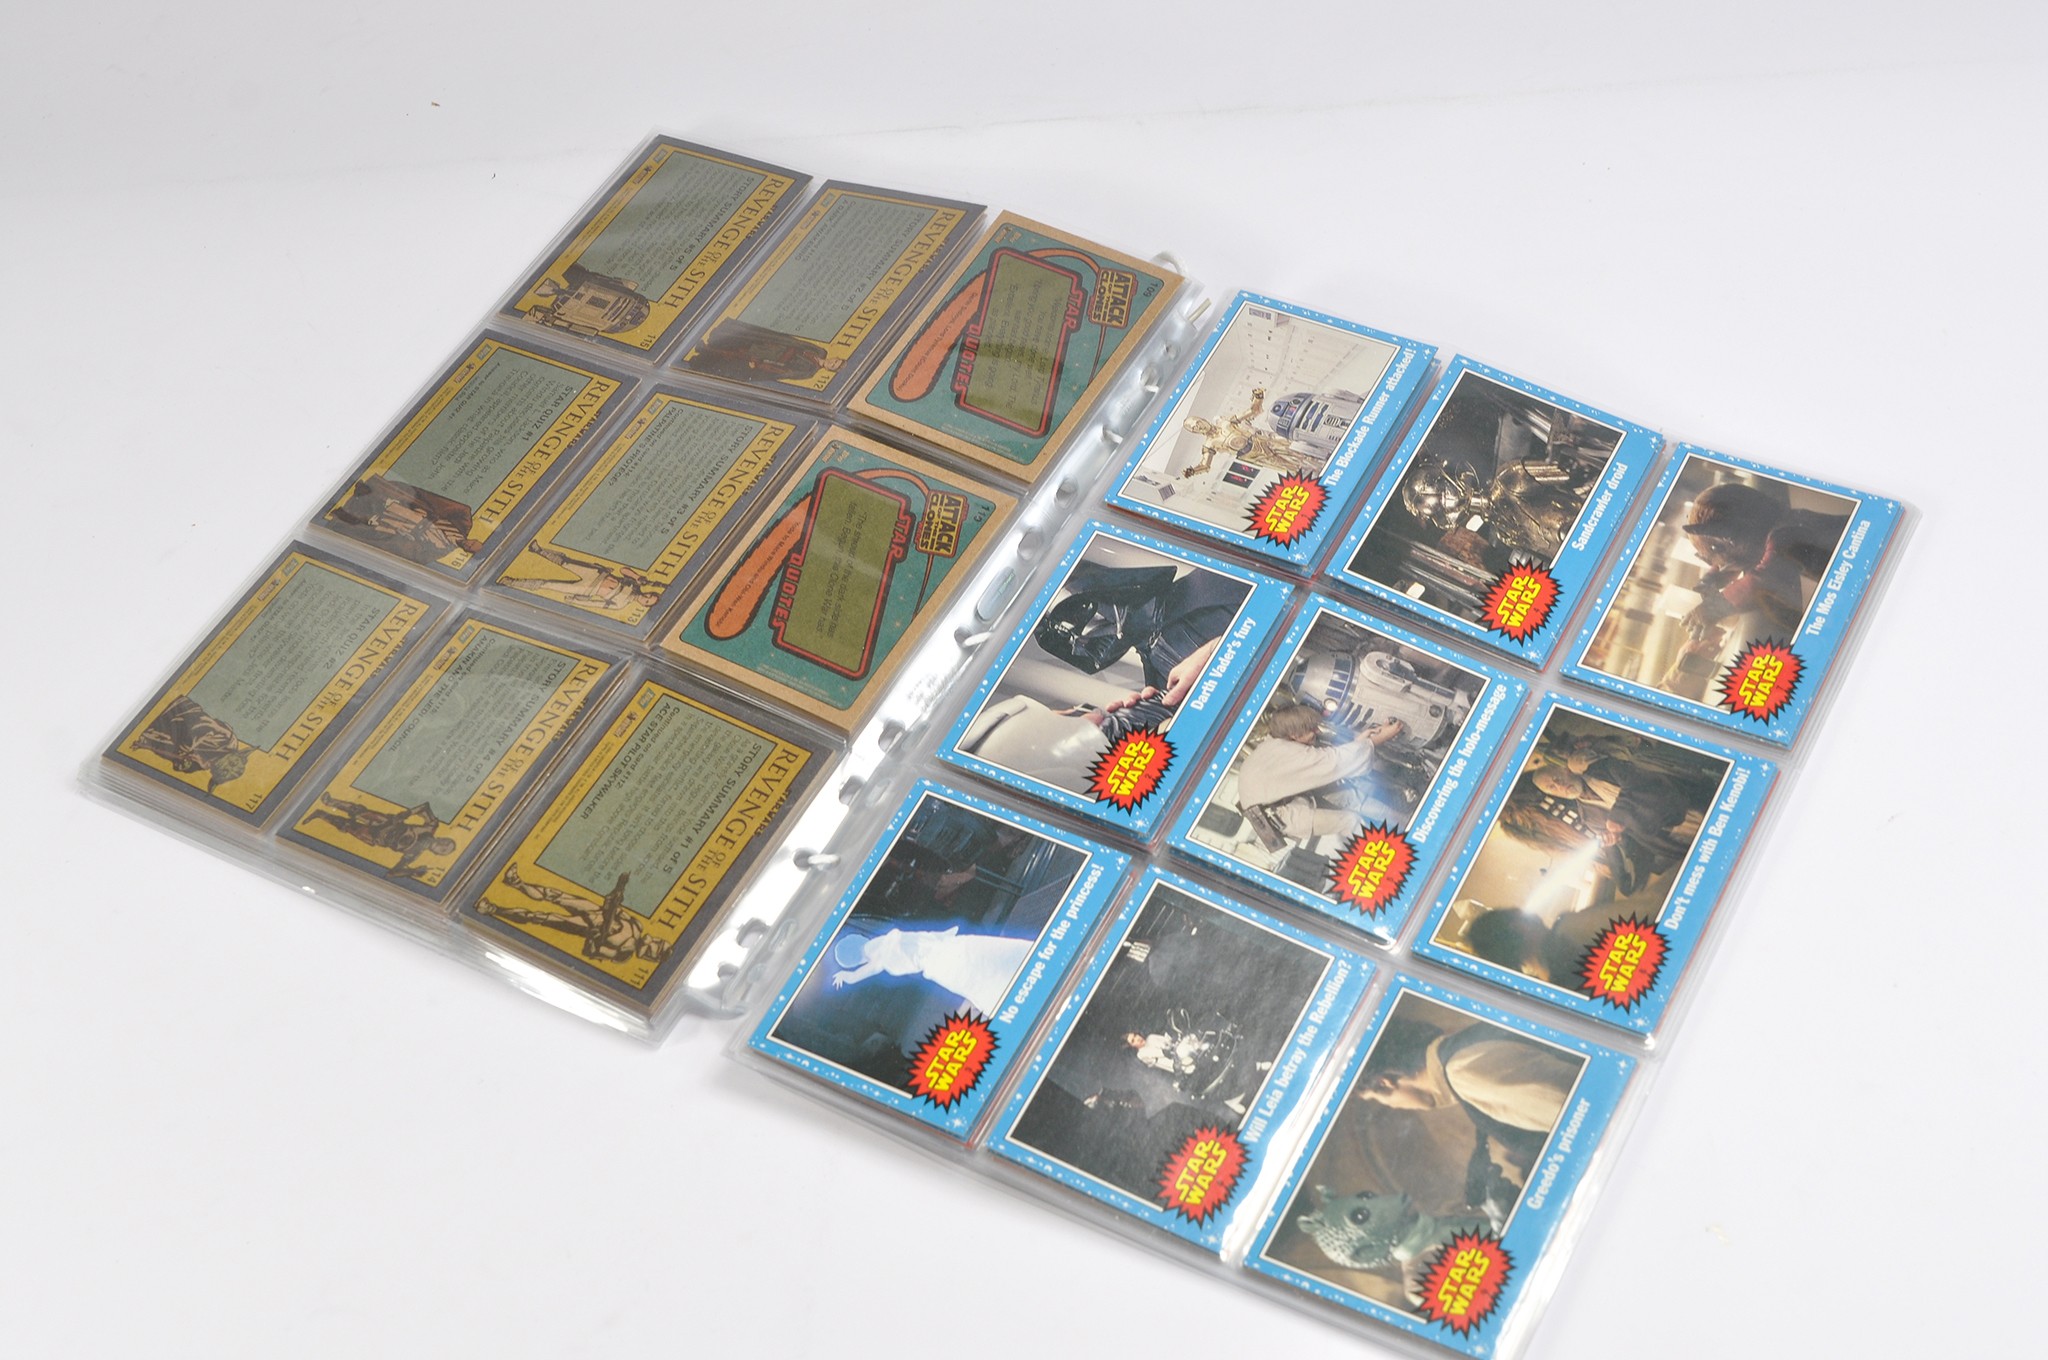 Star Wars Original Topps Trading Cards comprising a quantity of 117 issues from various series. - Image 2 of 3